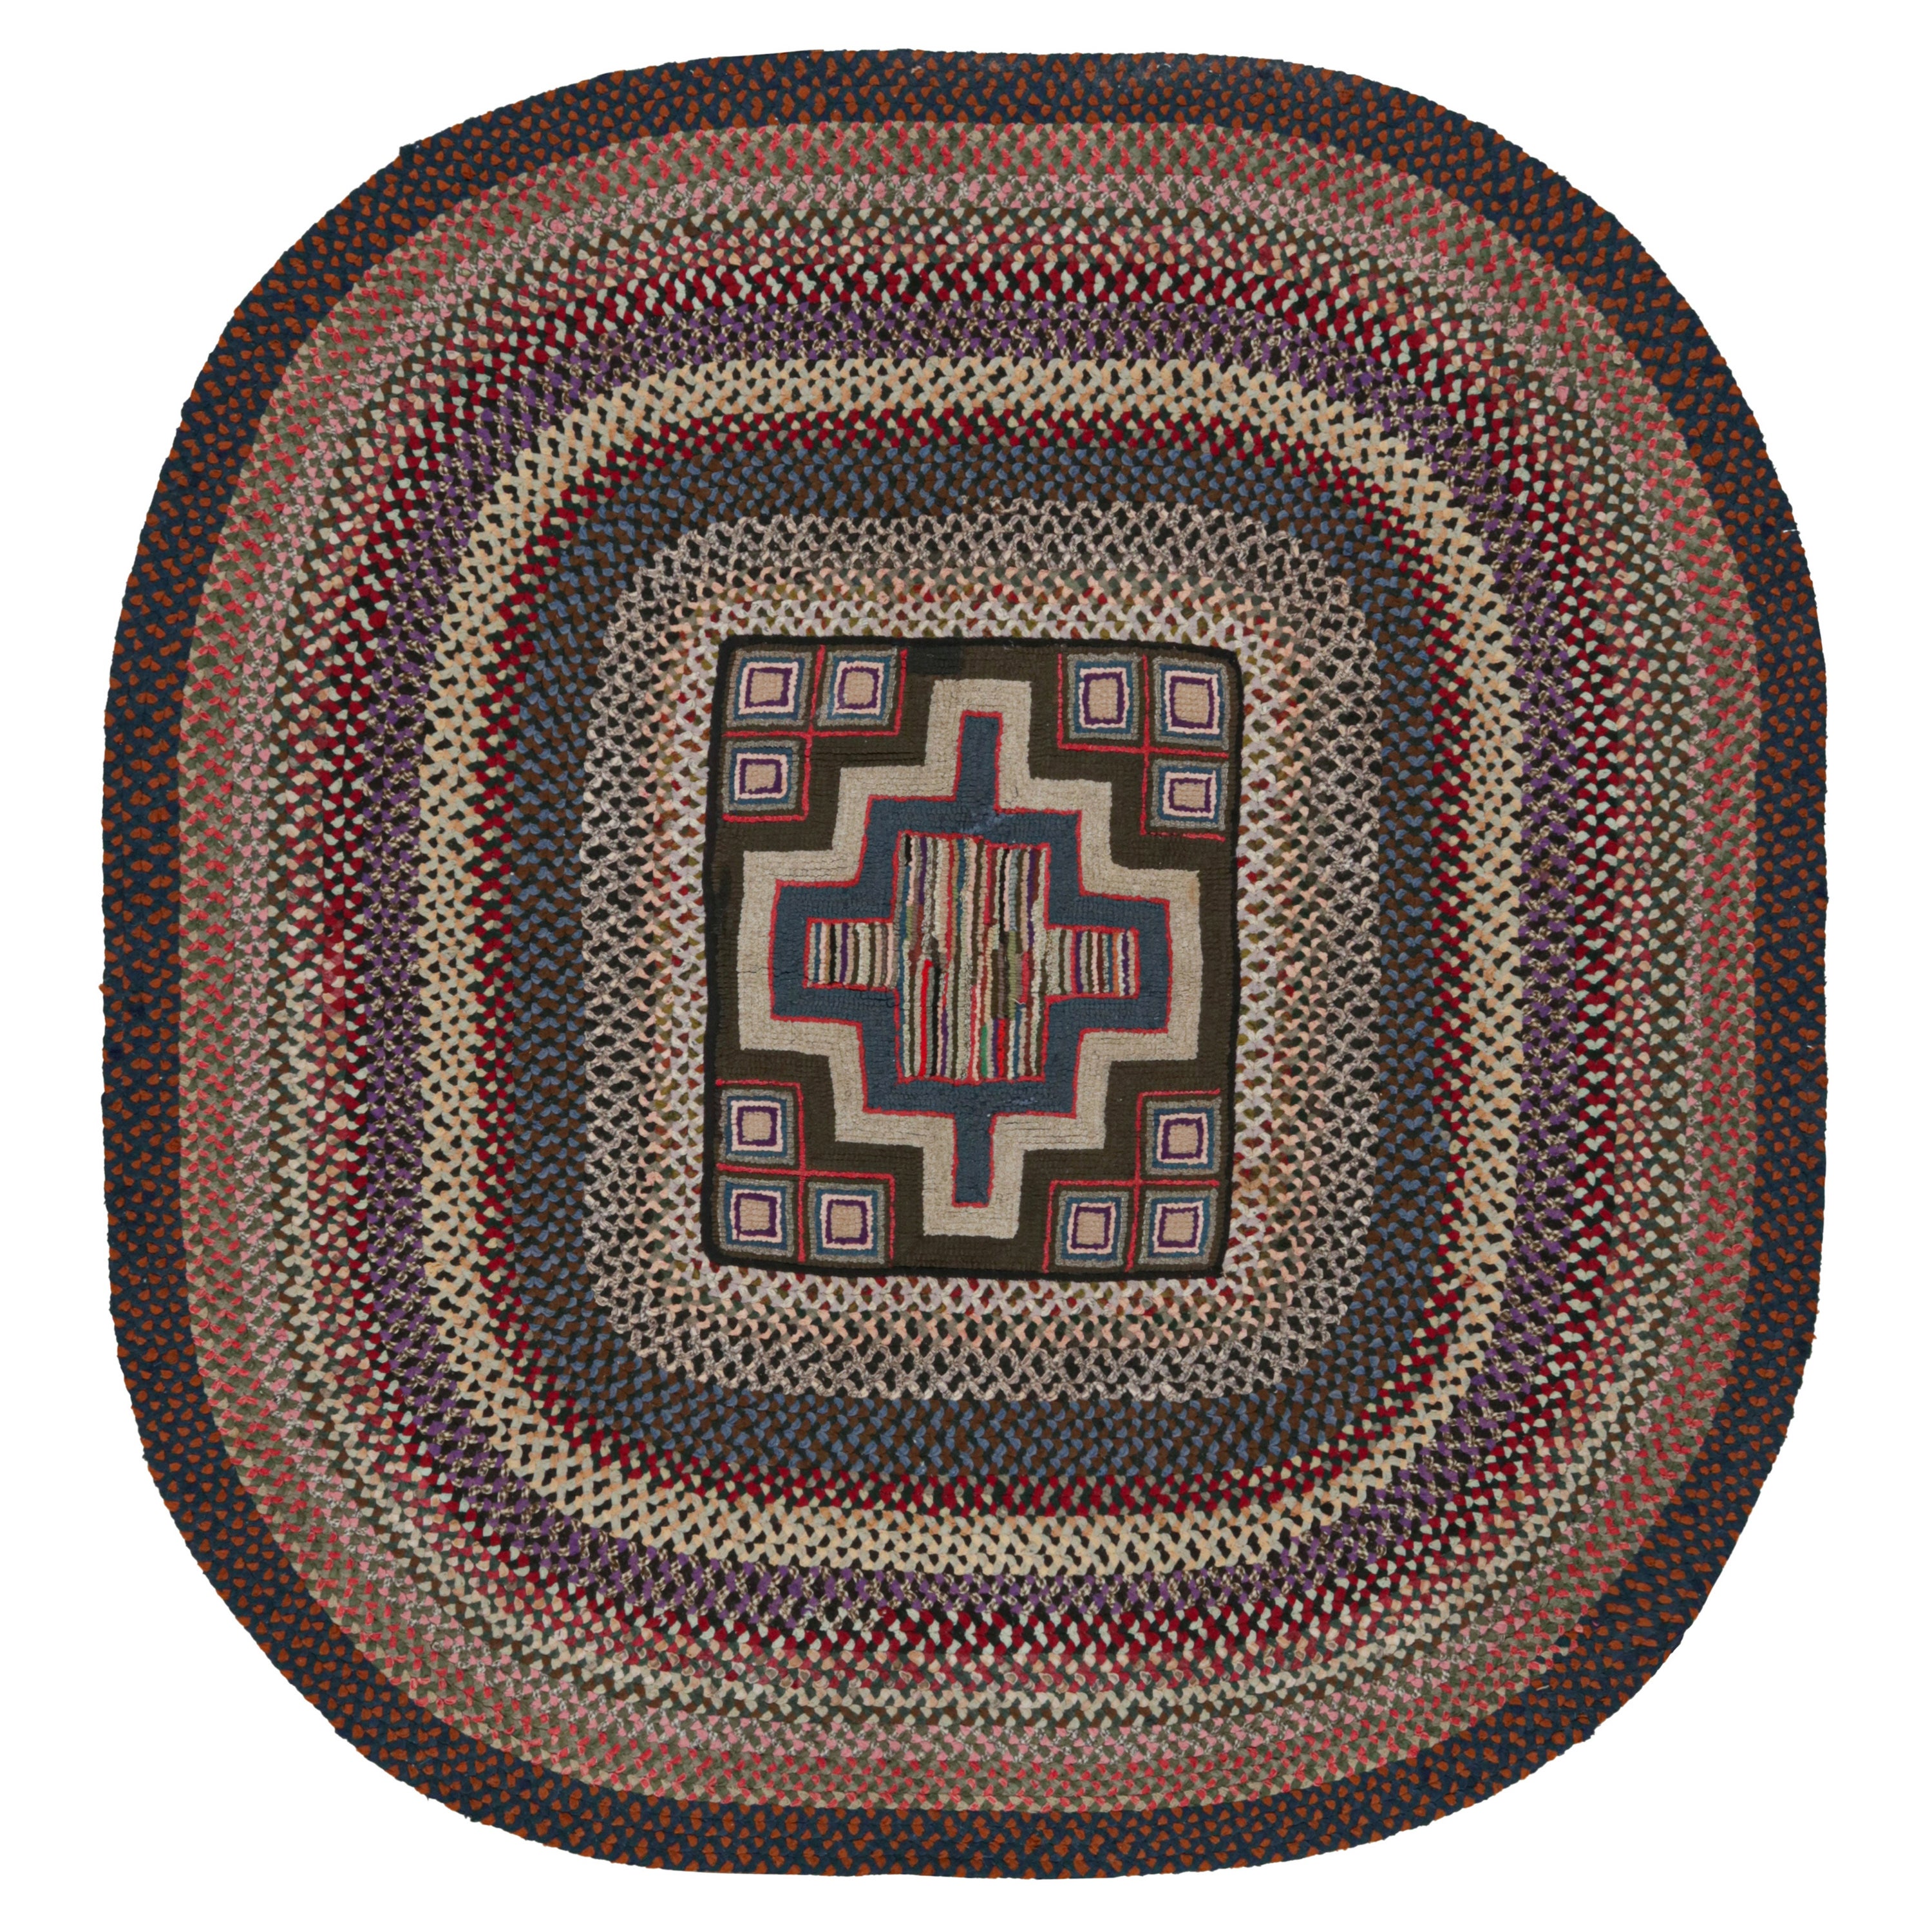 Antique Hooked Oval Rug with Stripes and Geometric Patterns, from Rug & Kilim For Sale